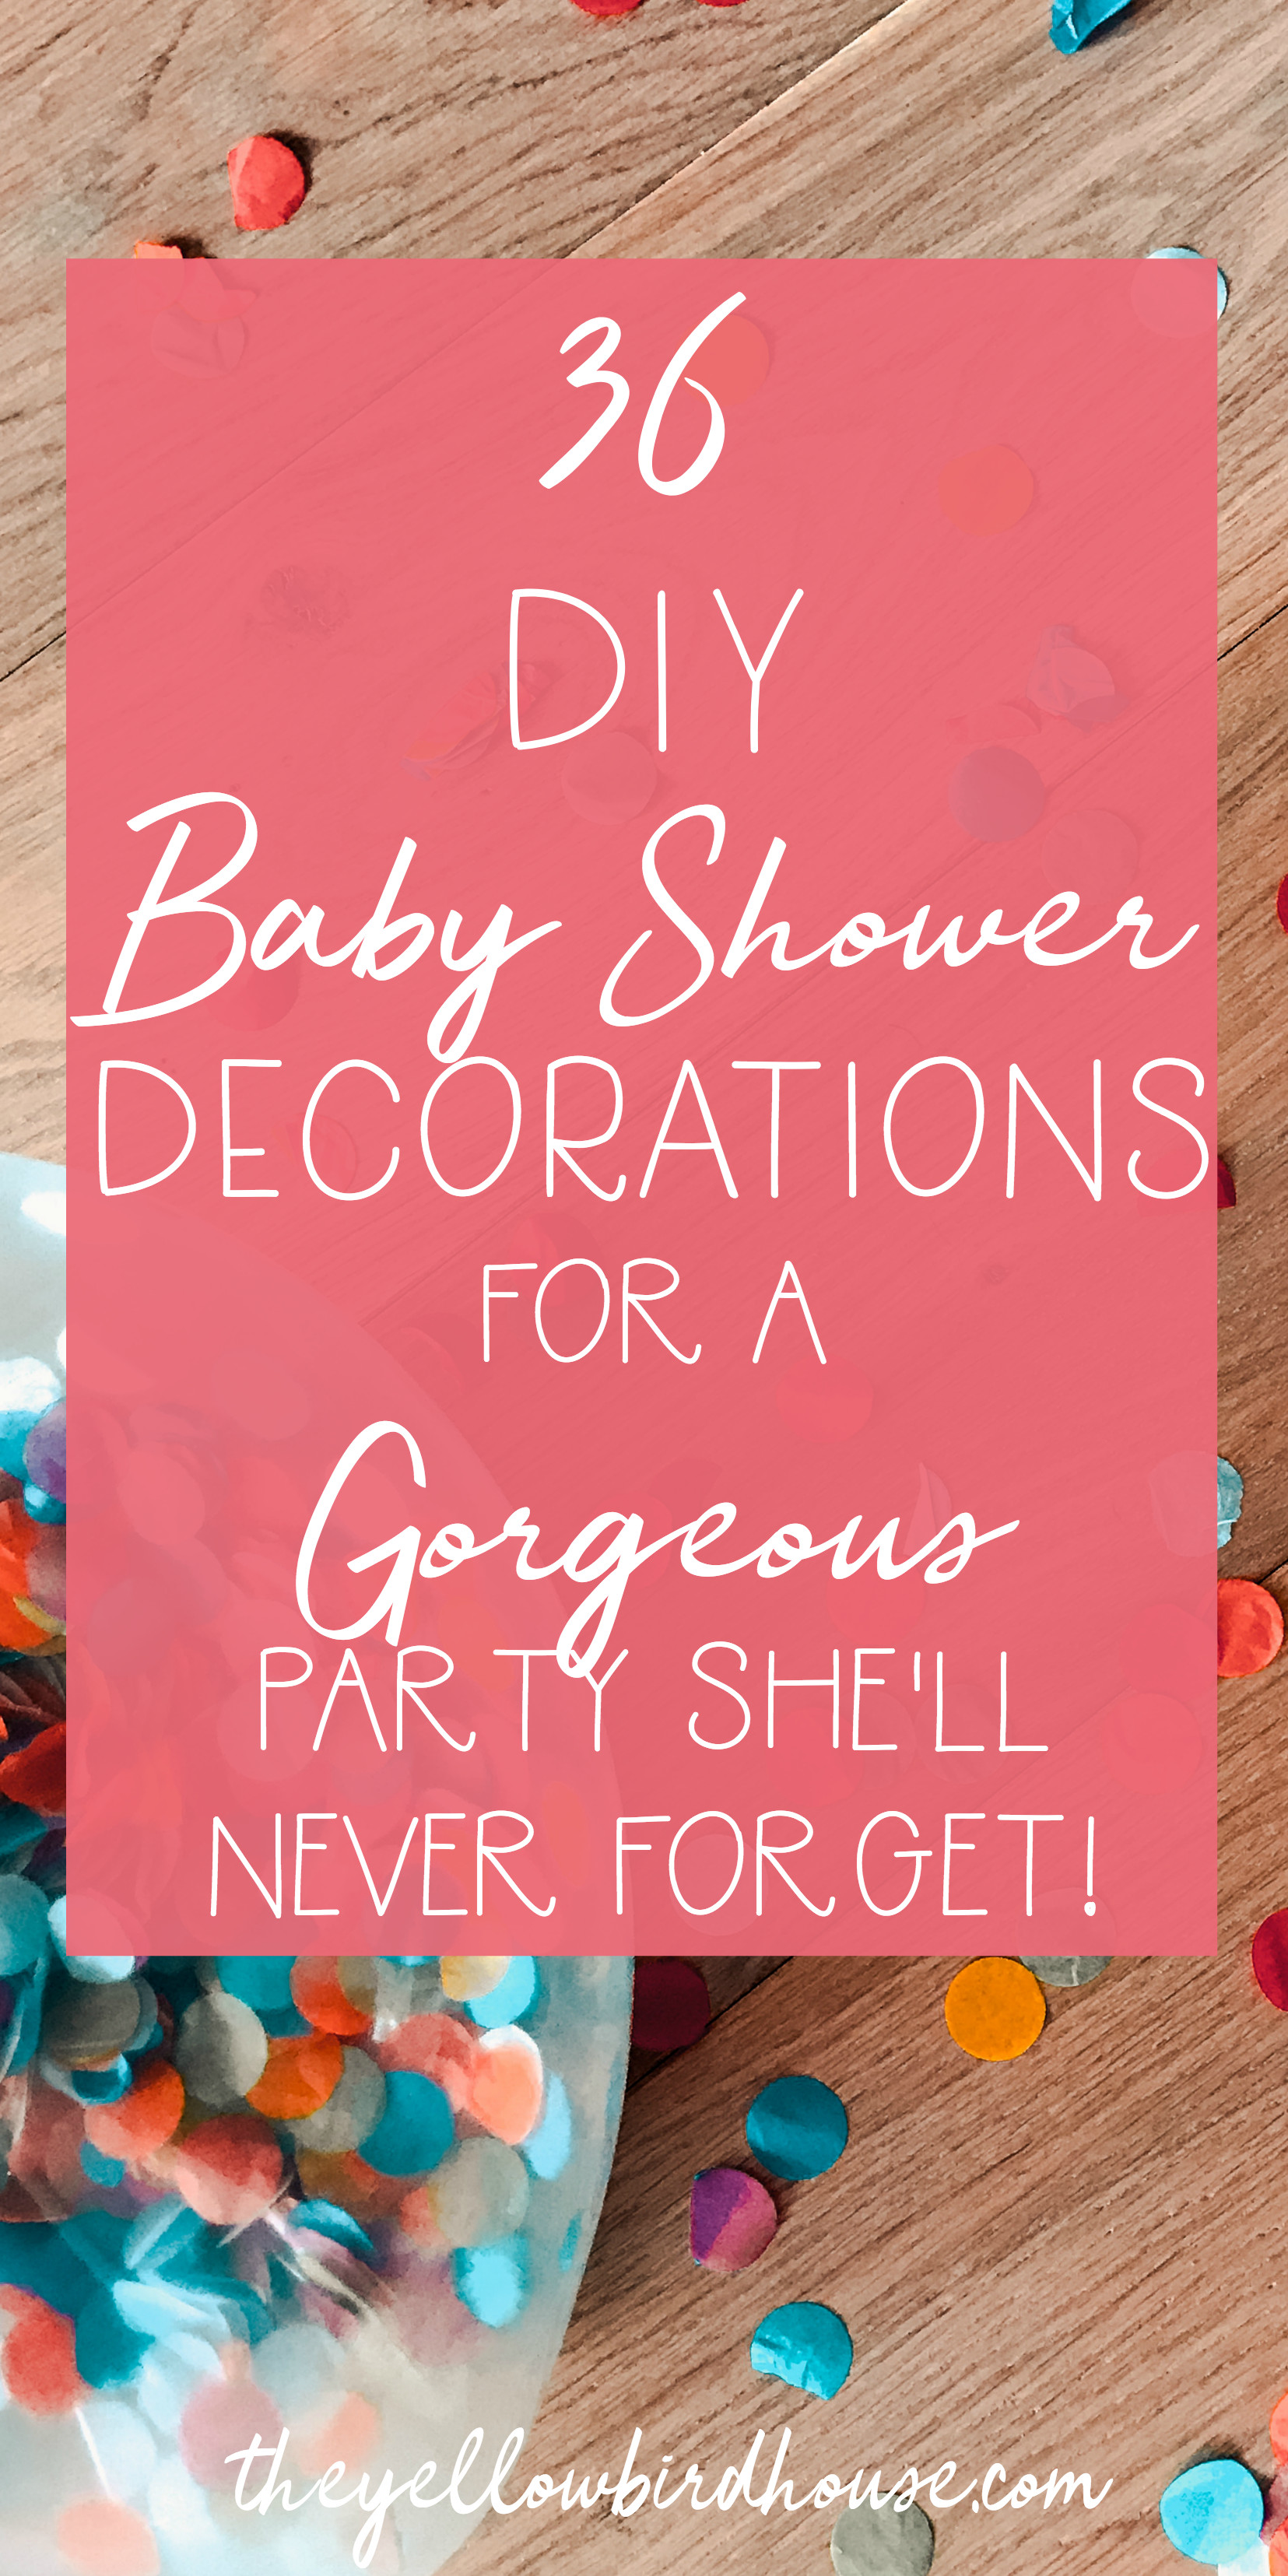 Baby Shower DIY Ideas
 36 DIY Baby Shower Decorations for a Gorgeous Party